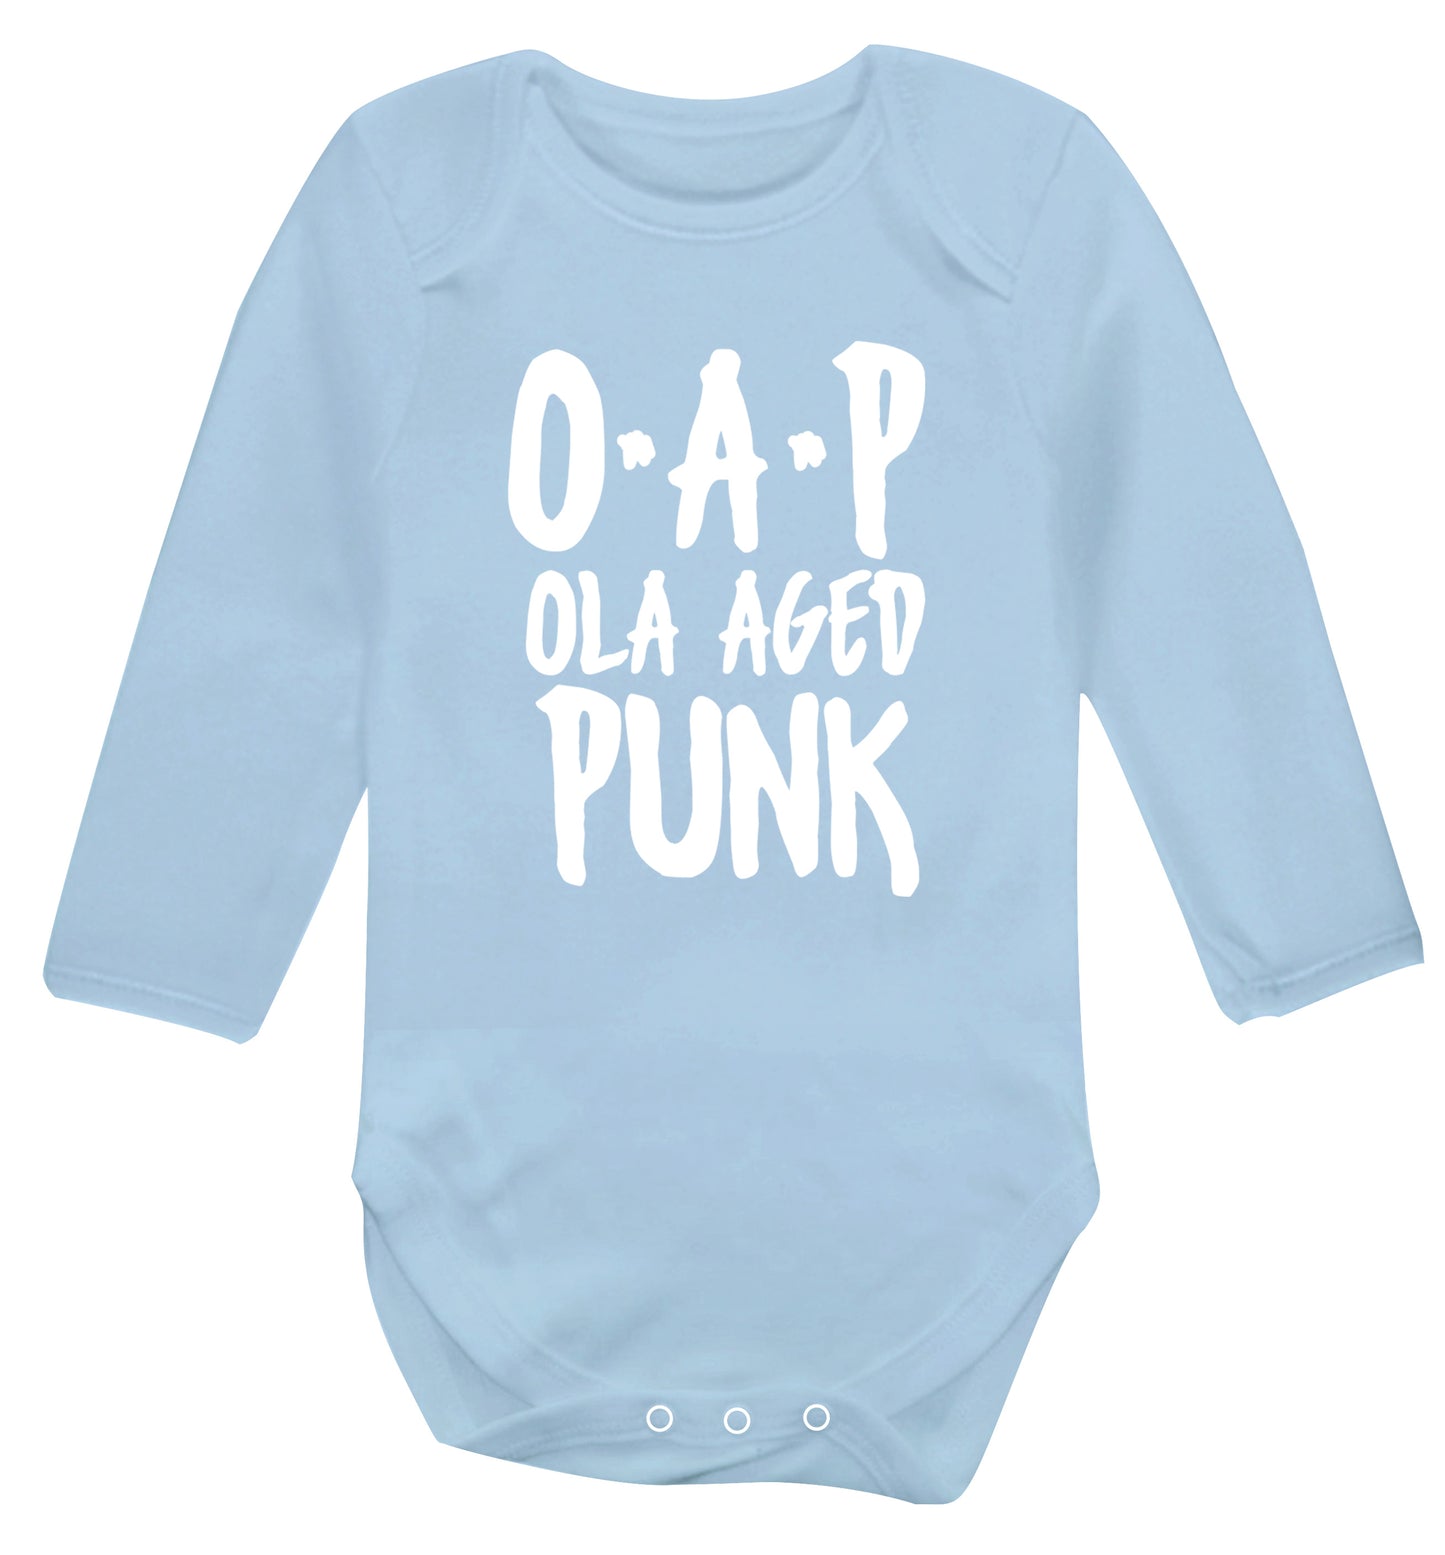 O.A.P Old Aged Punk Baby Vest long sleeved pale blue 6-12 months